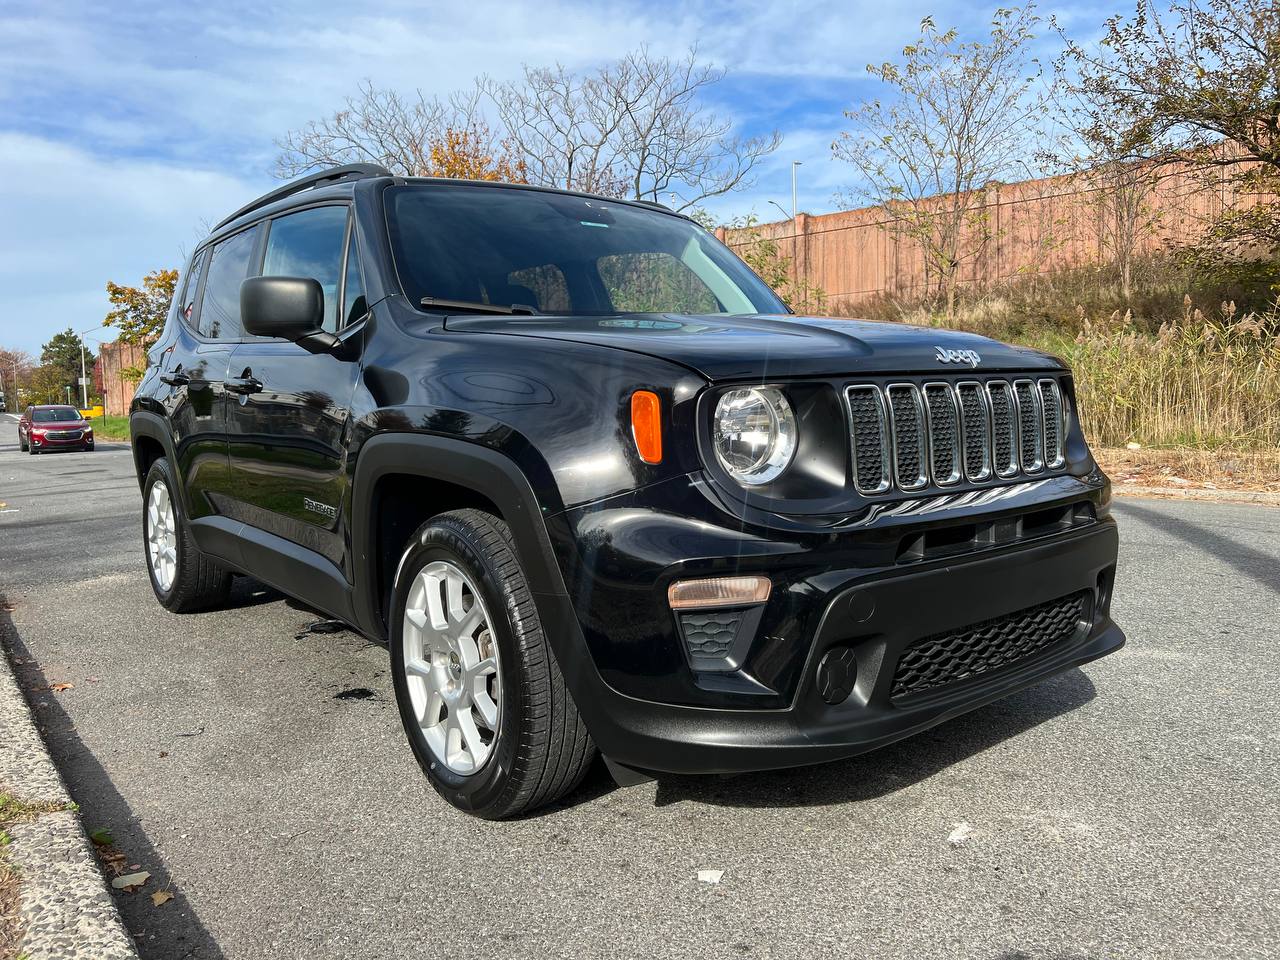 Used - Jeep Renegade Sport SUV for sale in Staten Island NY